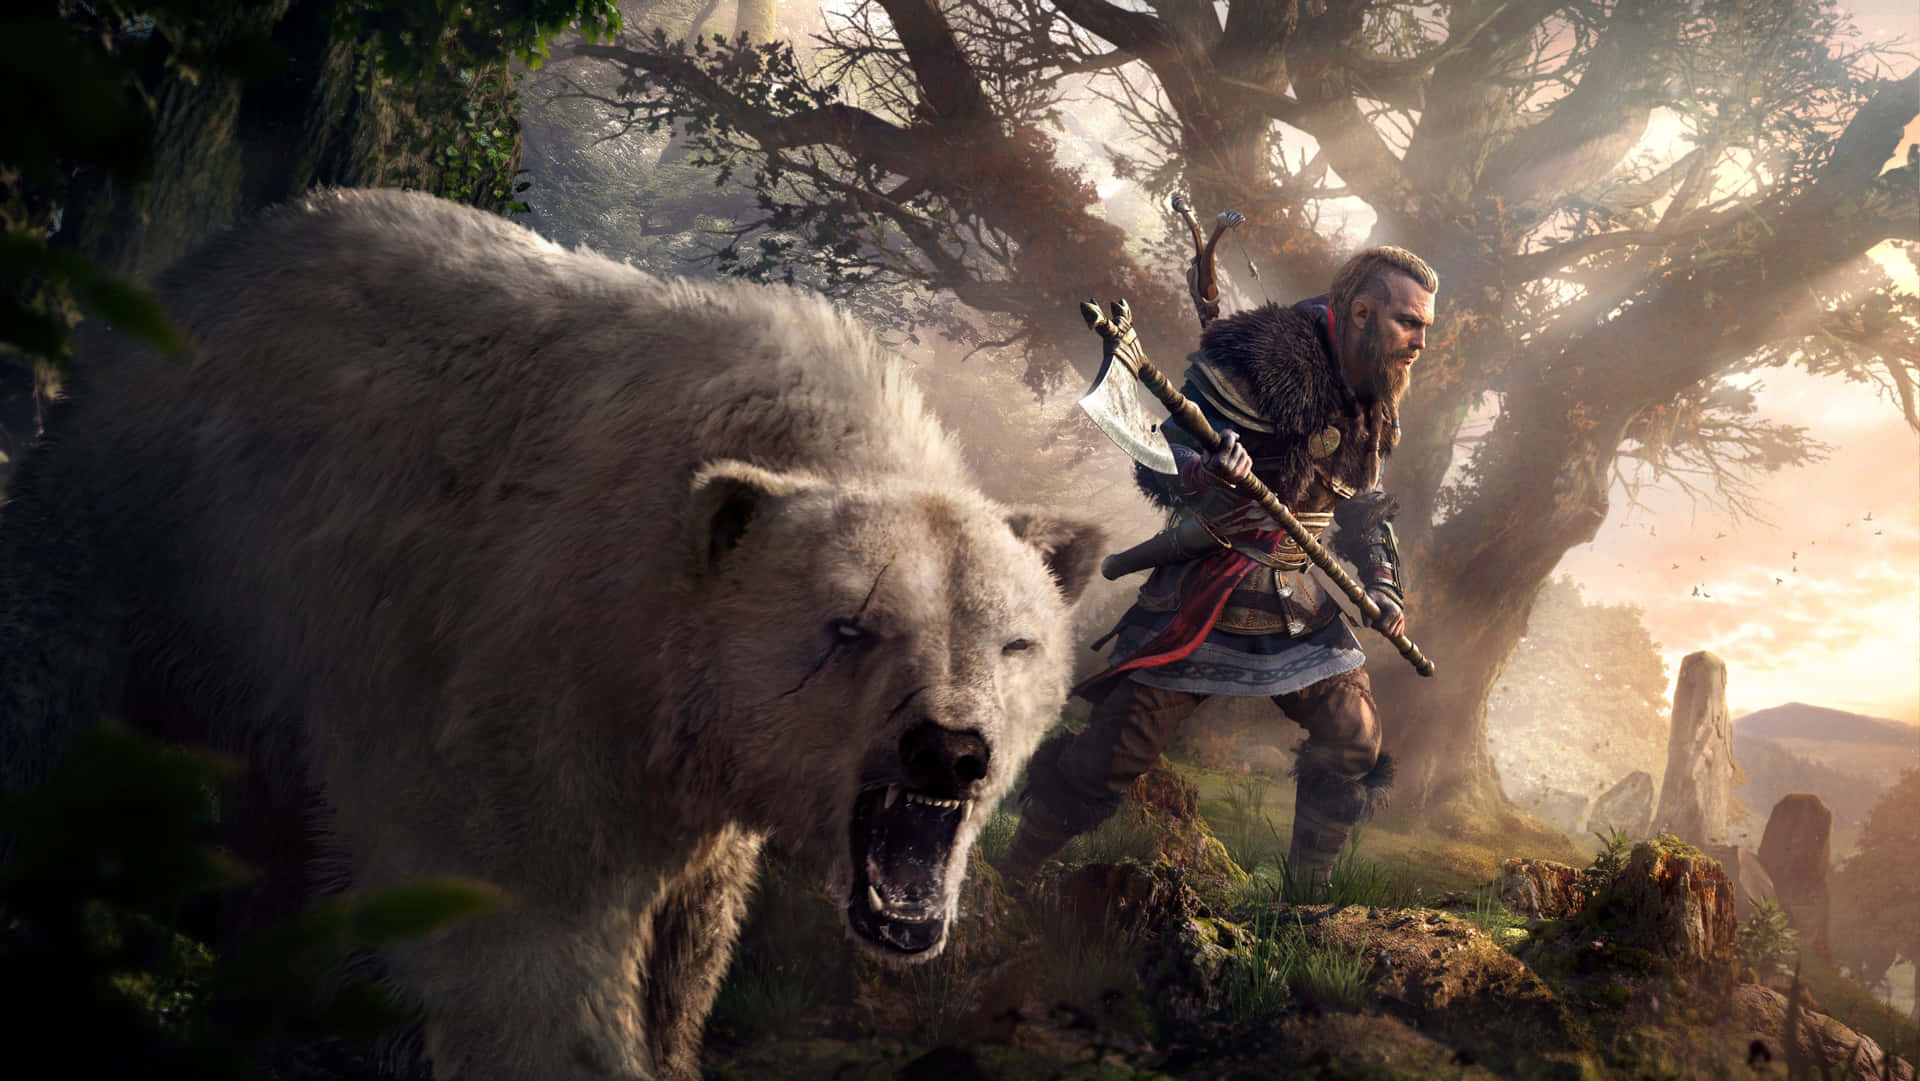 A Man With A Sword And A Bear In The Woods